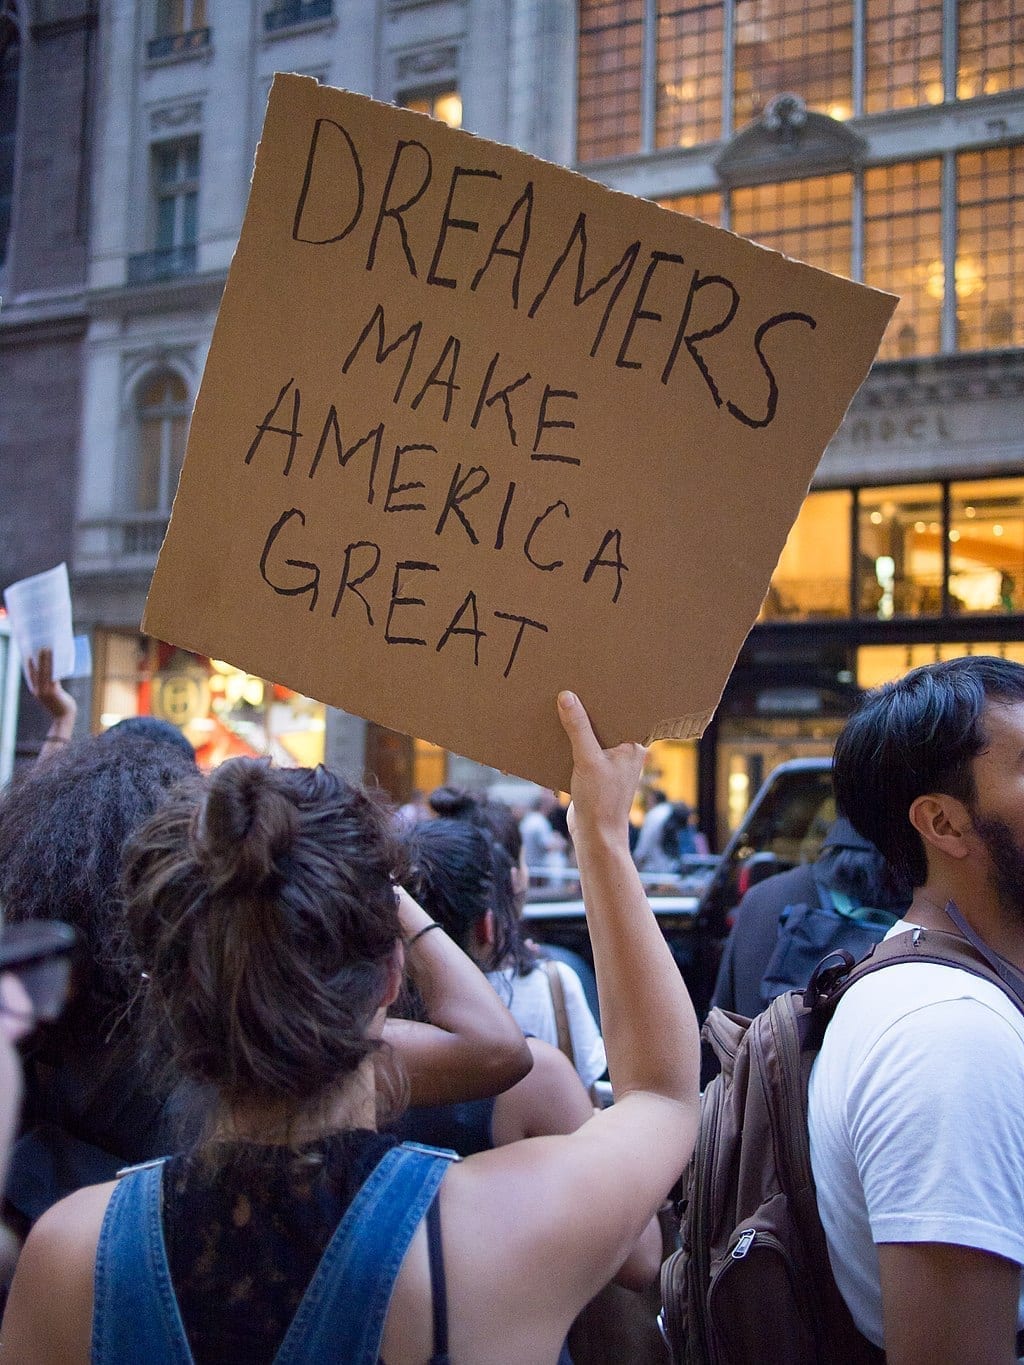 Protest in support of DACA (against its rescission) at Trump Tower in New York City; photo by Rhododendrites (Own work), CC BY-SA 4.0, via Wikimedia Commons, no changes.